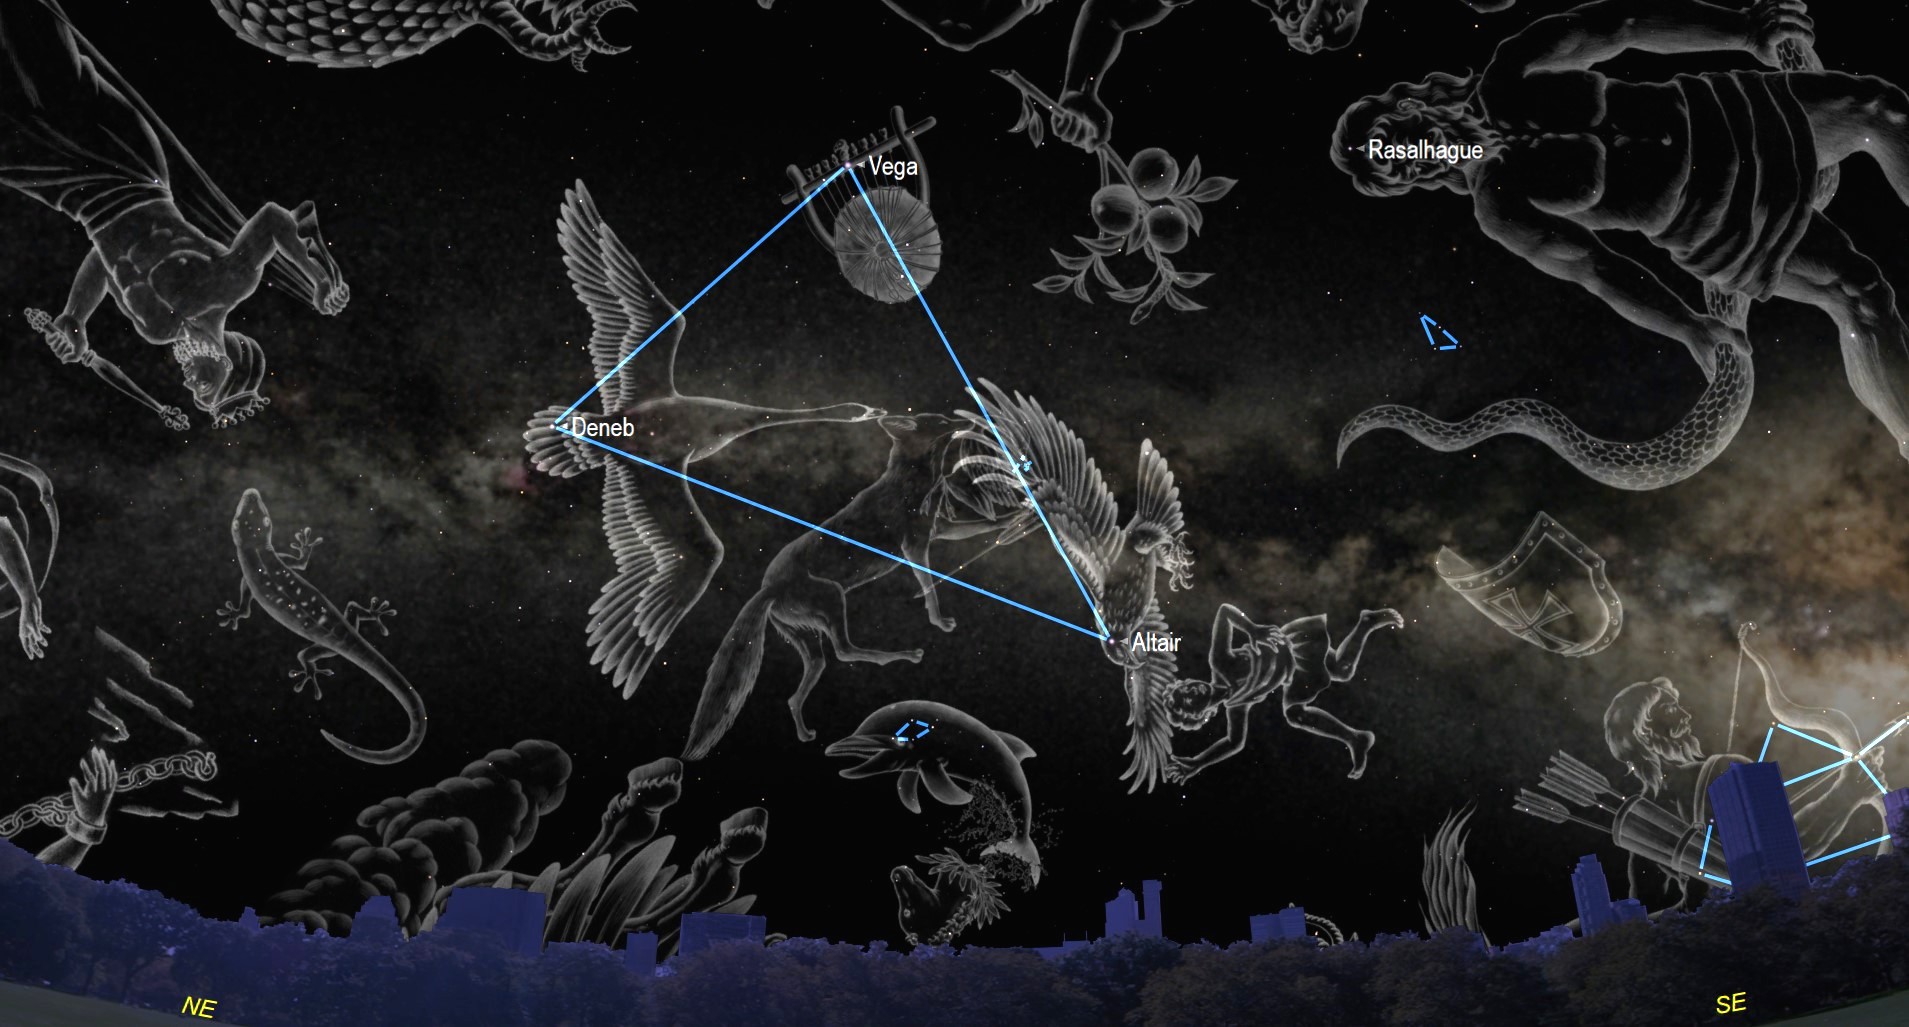 Graphic of Starry Night showing the Summer Triangle and associated constellations.